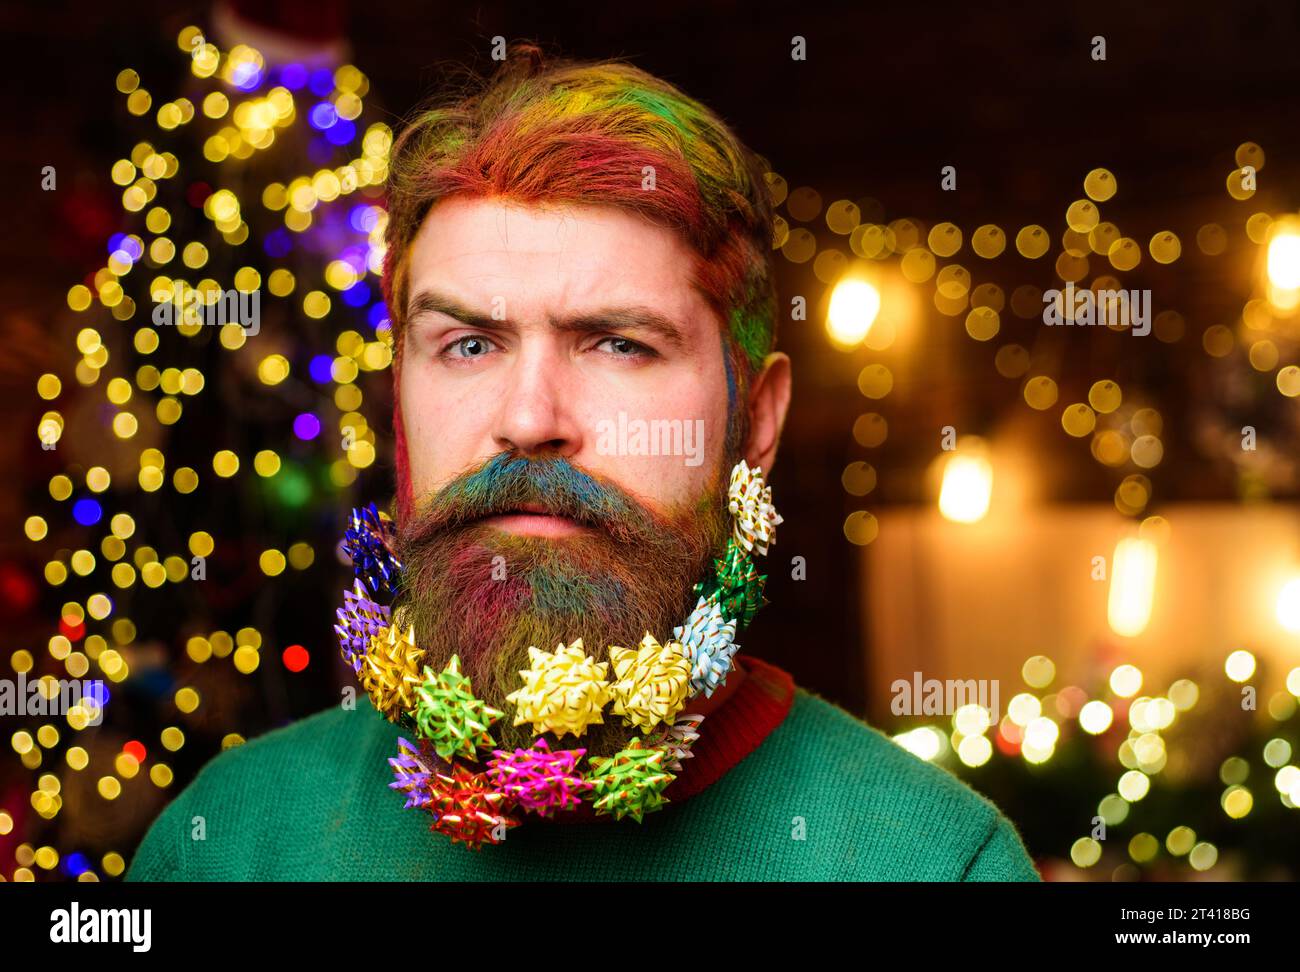 Merry Christmas. Happy New Year. Bearded man with dyed hair and decorated beard ready for New year party. Christmas beard decoration. Serious bearded Stock Photo